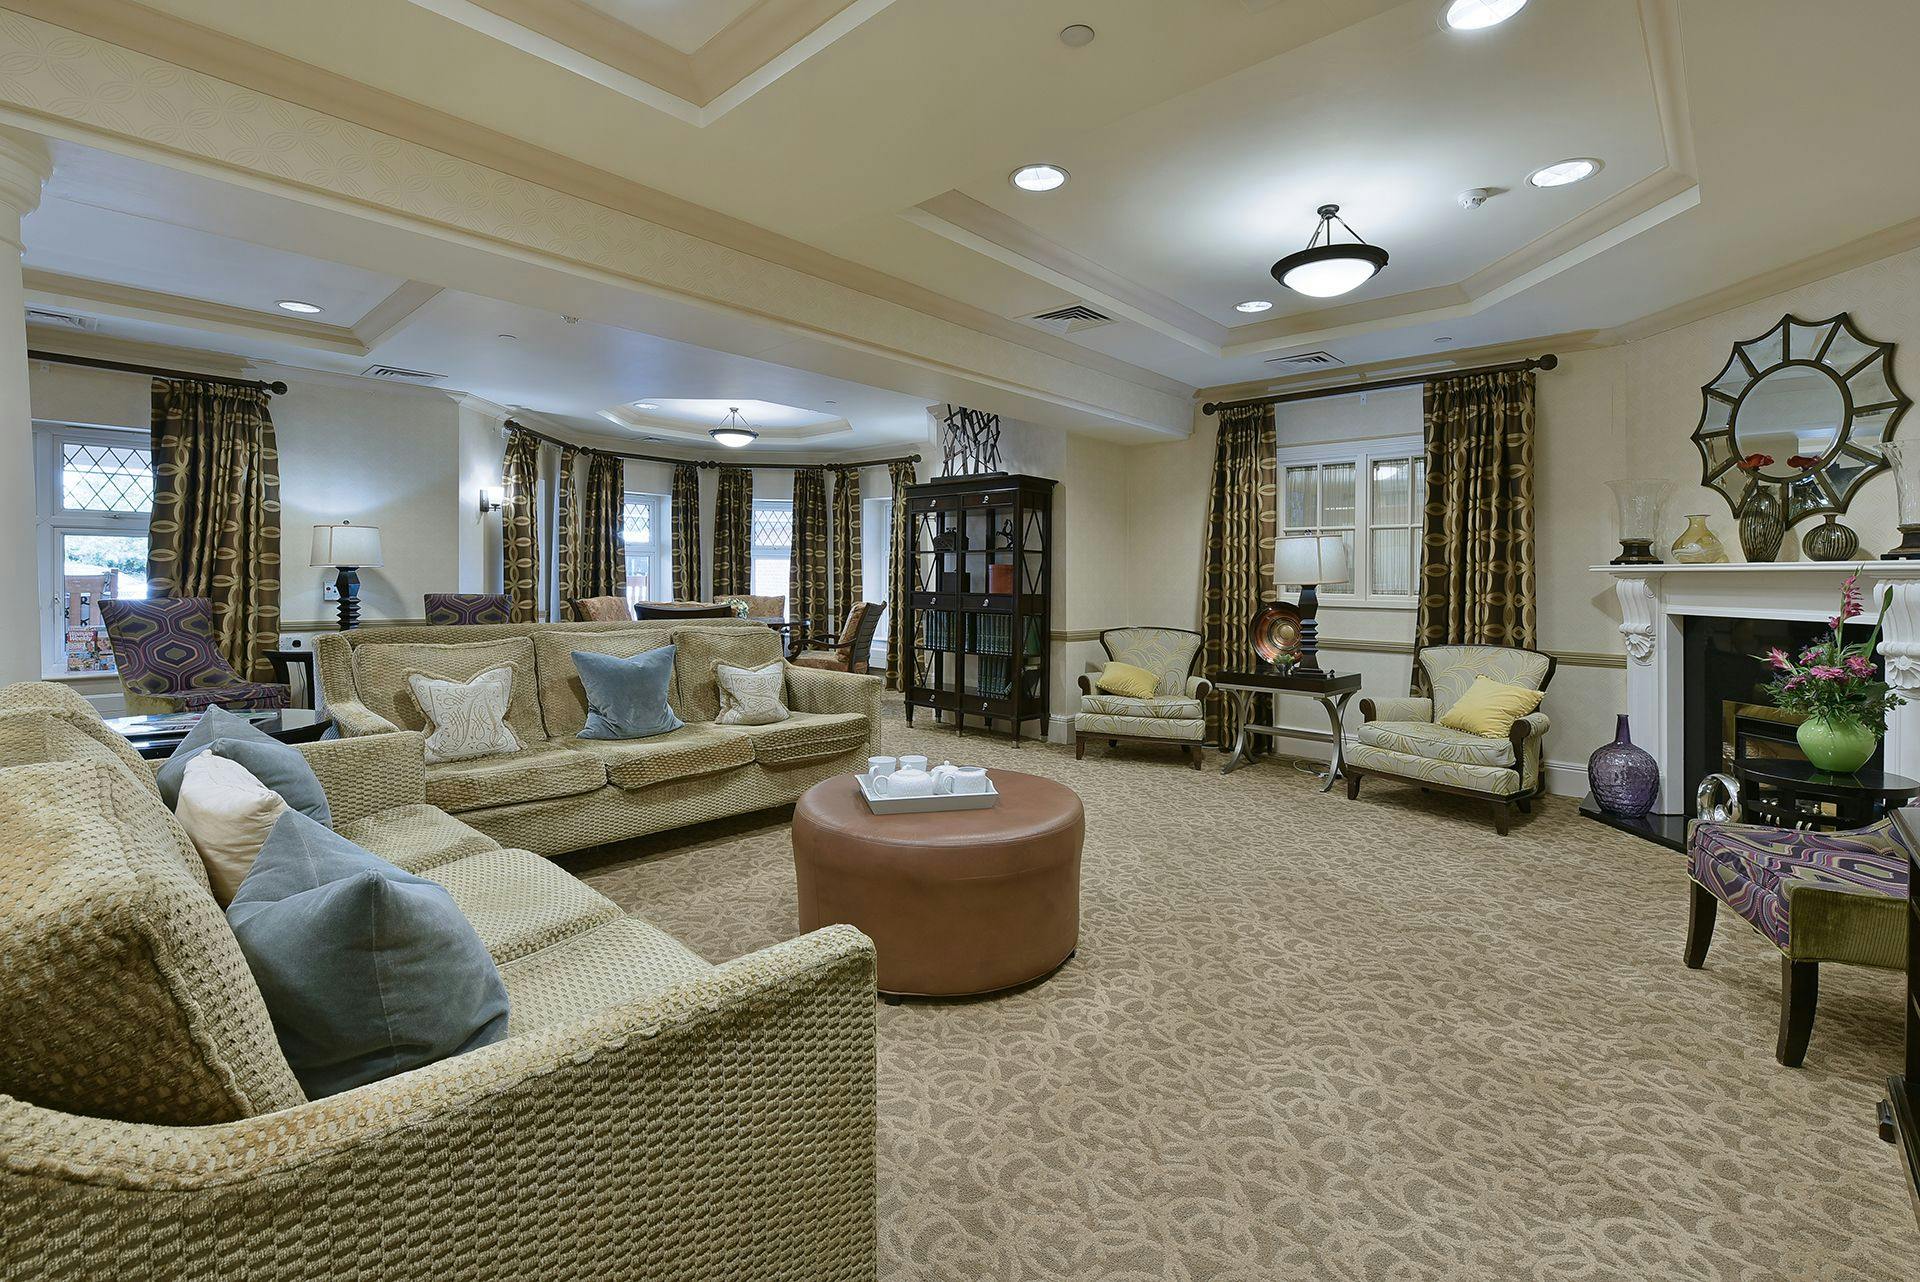 Lounge at Sonning Gardens care home in Sonning, Berkshire